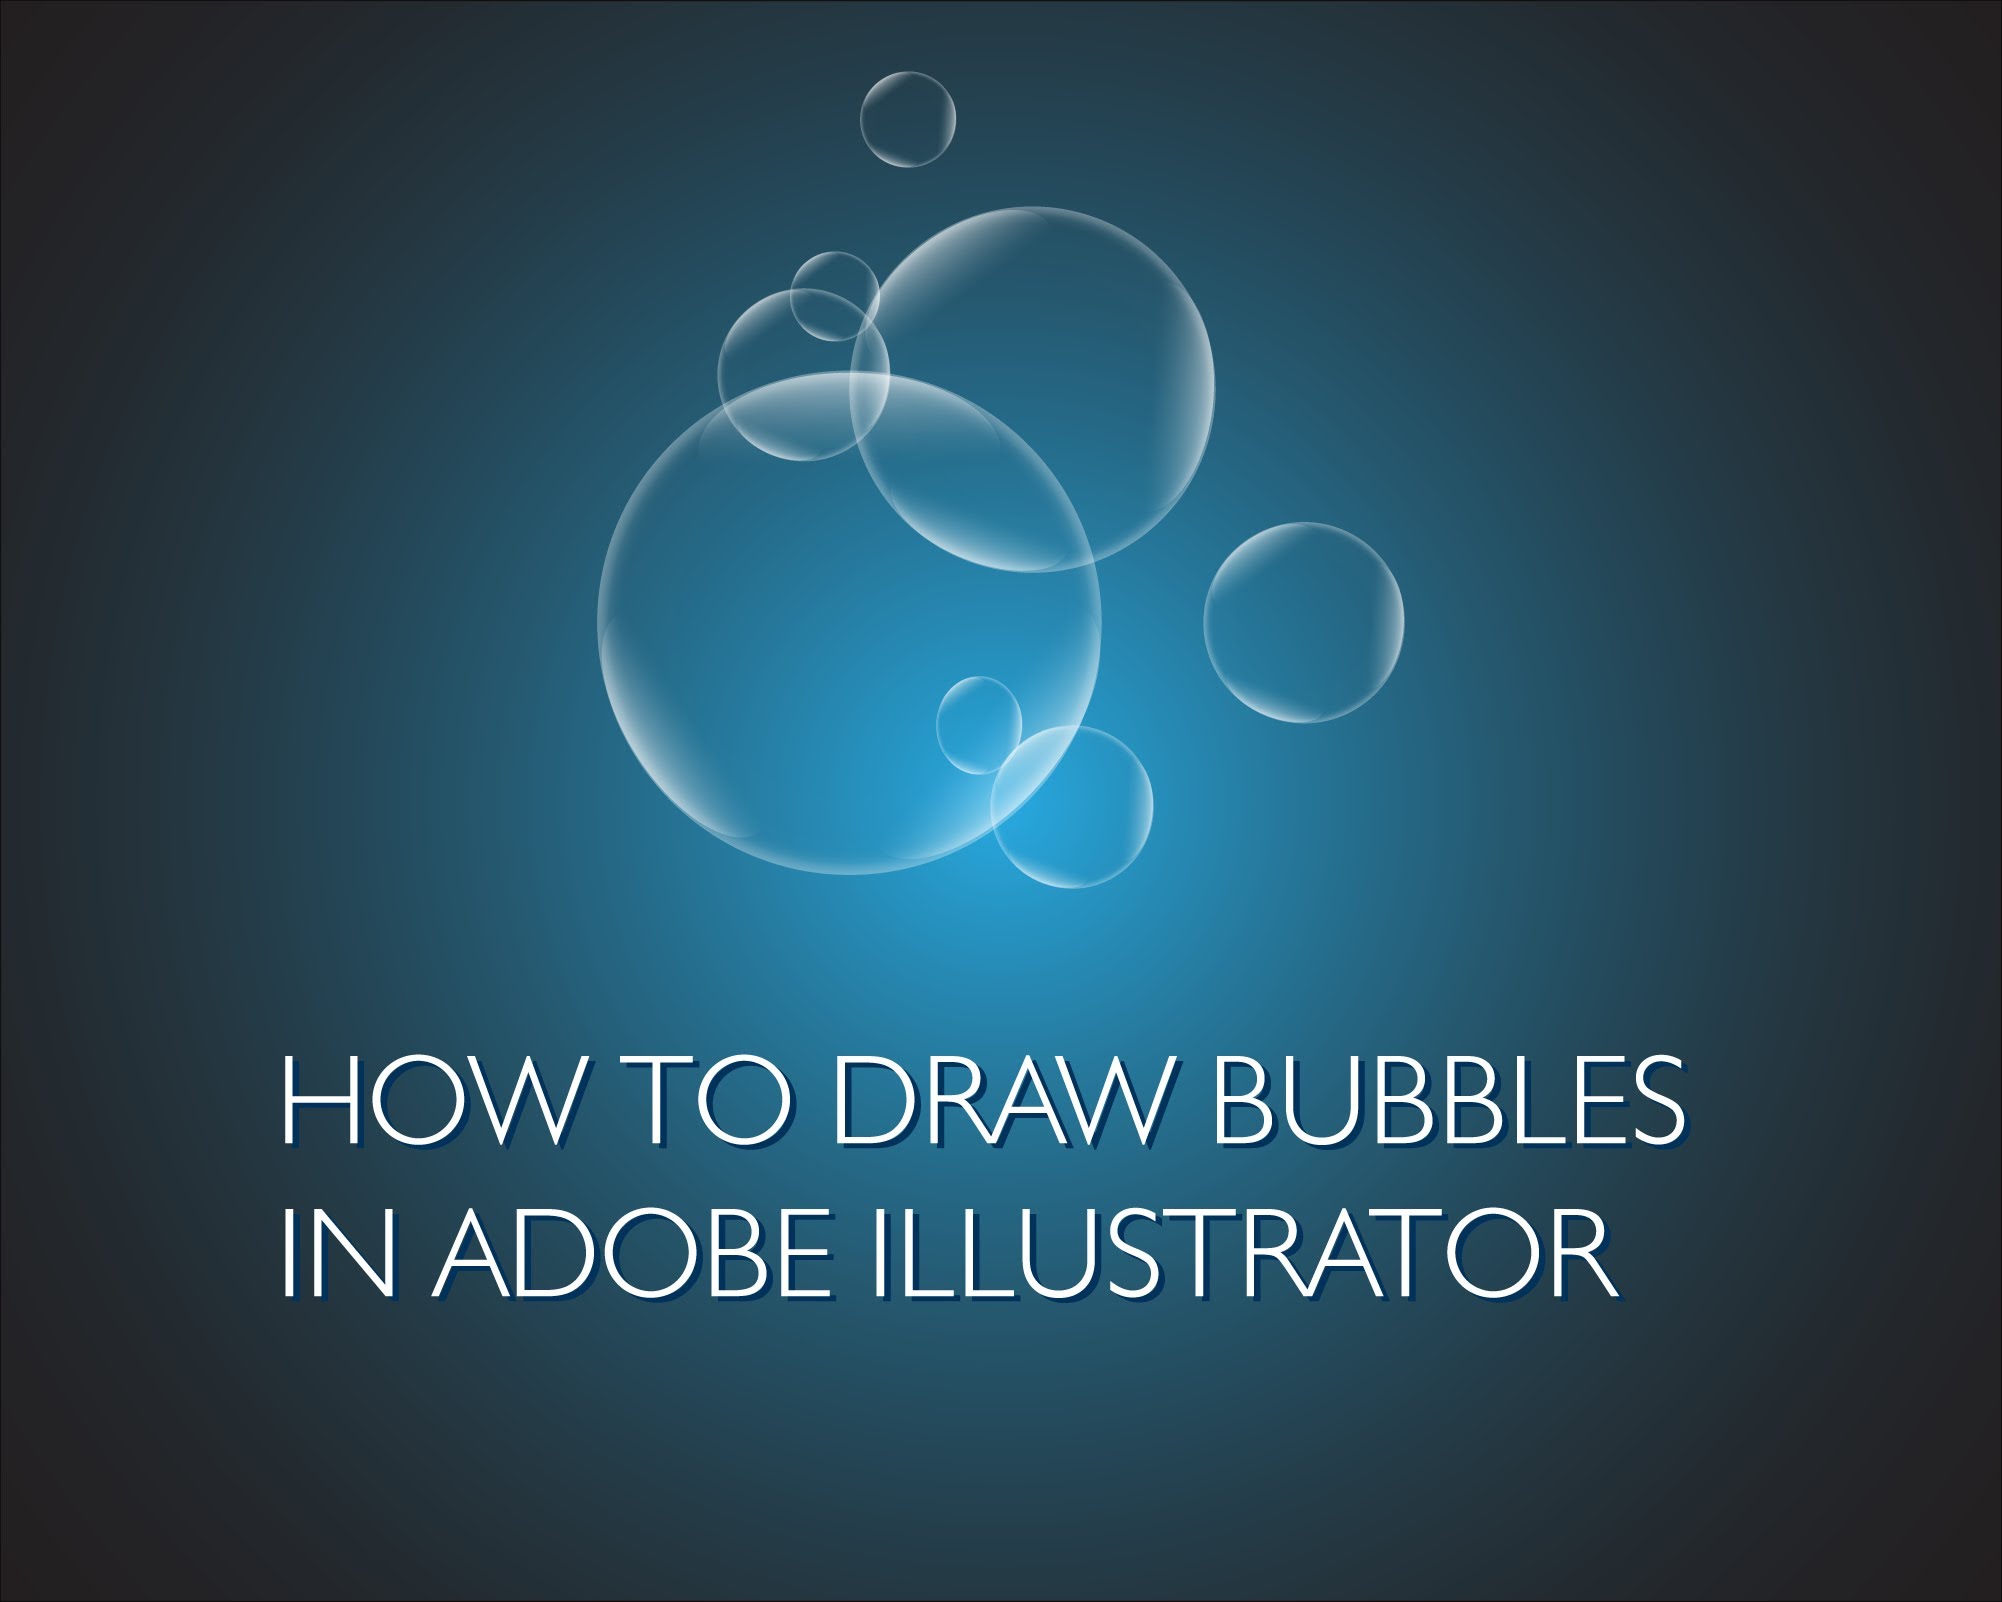 Adobe Illustrator - how to draw bubbles - YouTube